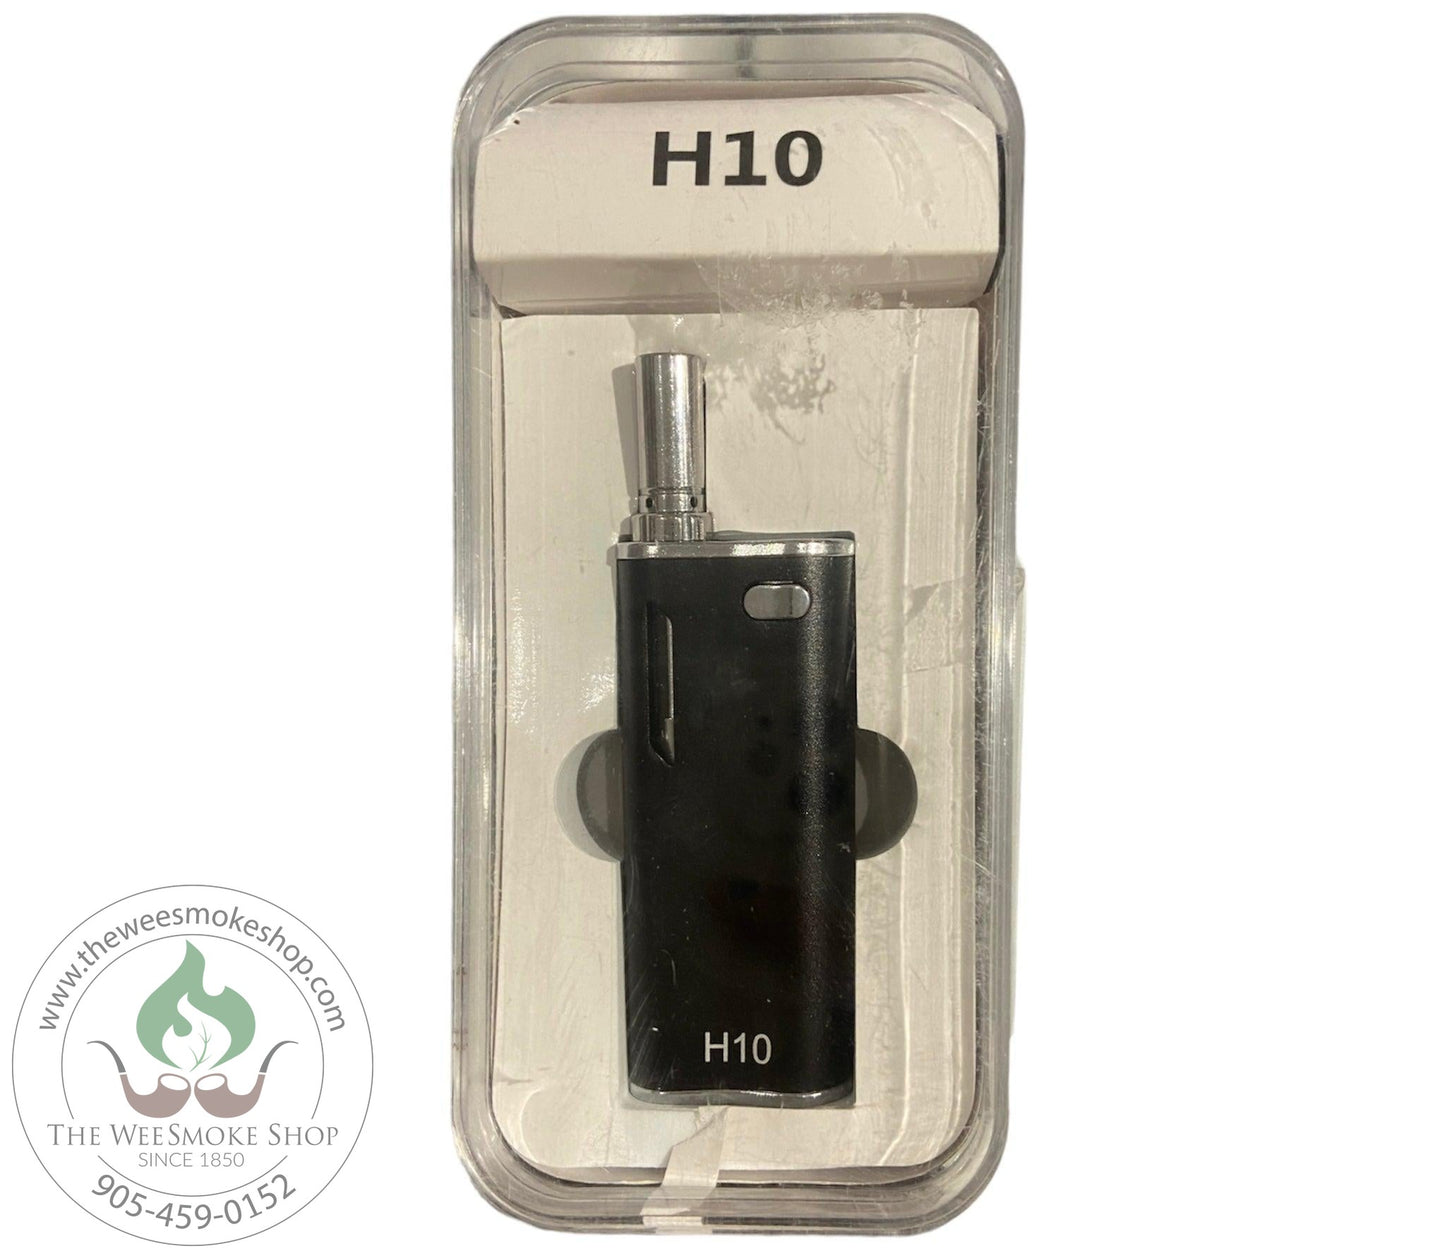 Black-Hibron H10 510 Concentrate Vaporizer-510-The Wee Smoke Shop